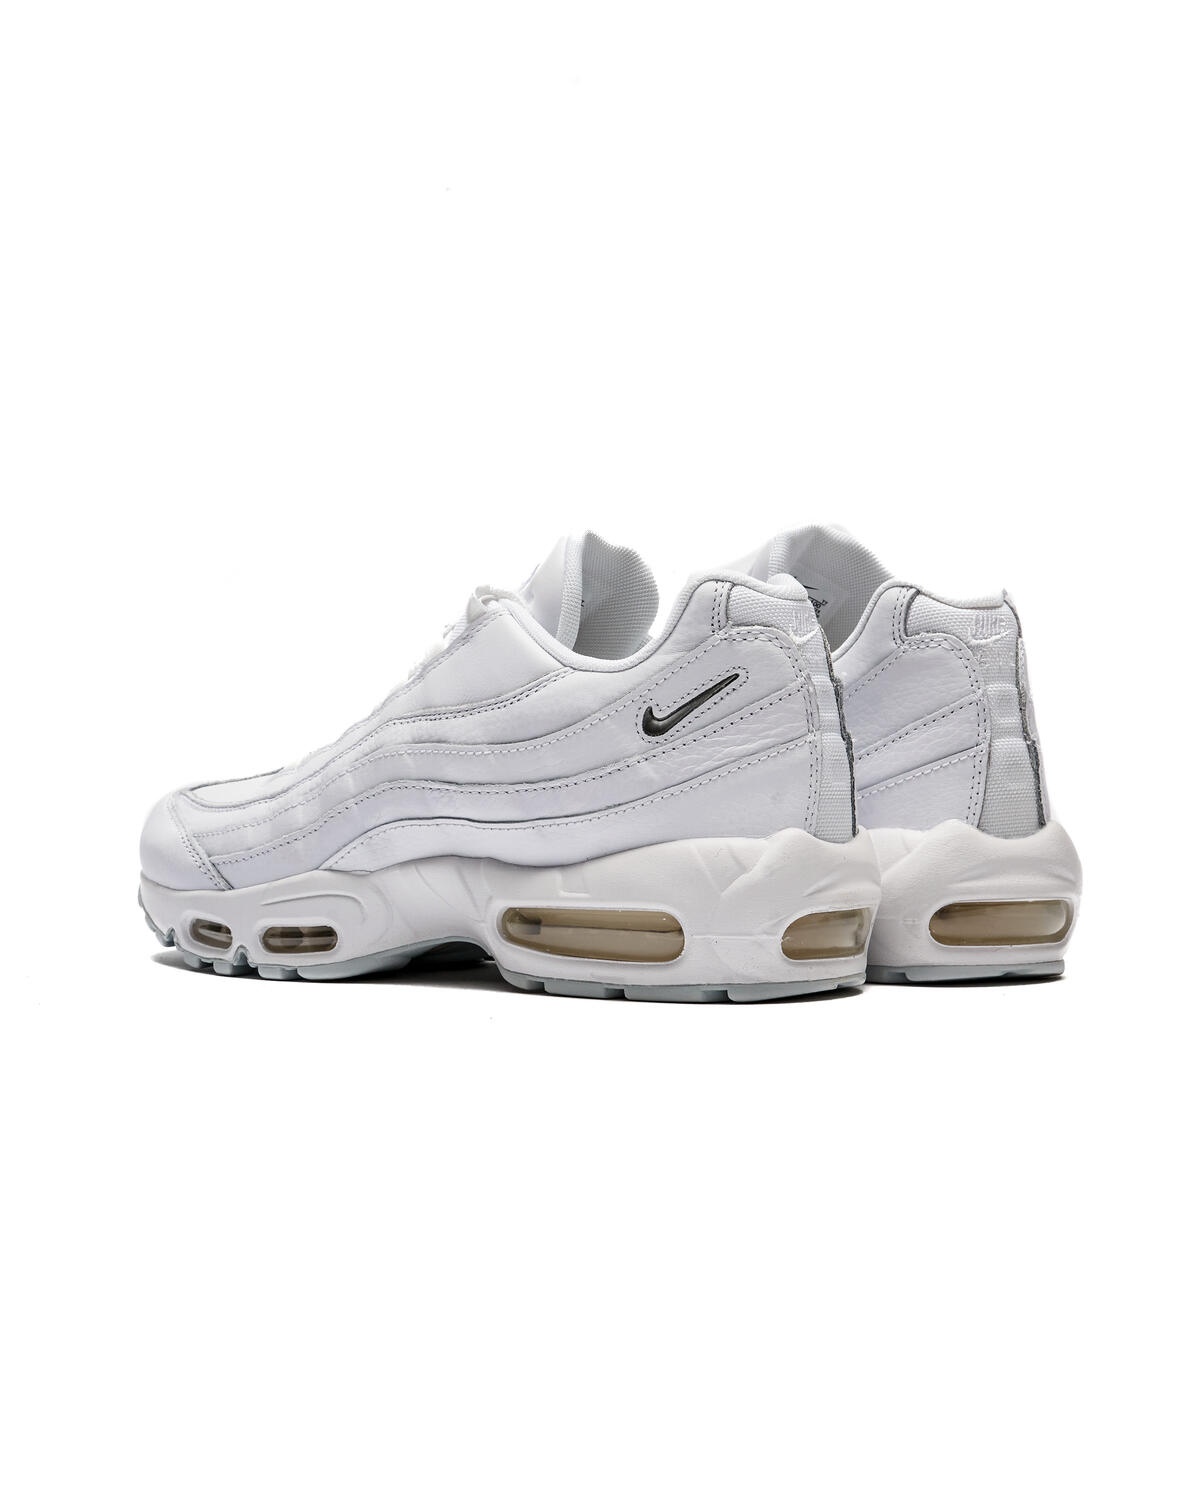 nep Booth moeder Nike AIR MAX 95 'Triple White' | FN7273-100 | AFEW STORE